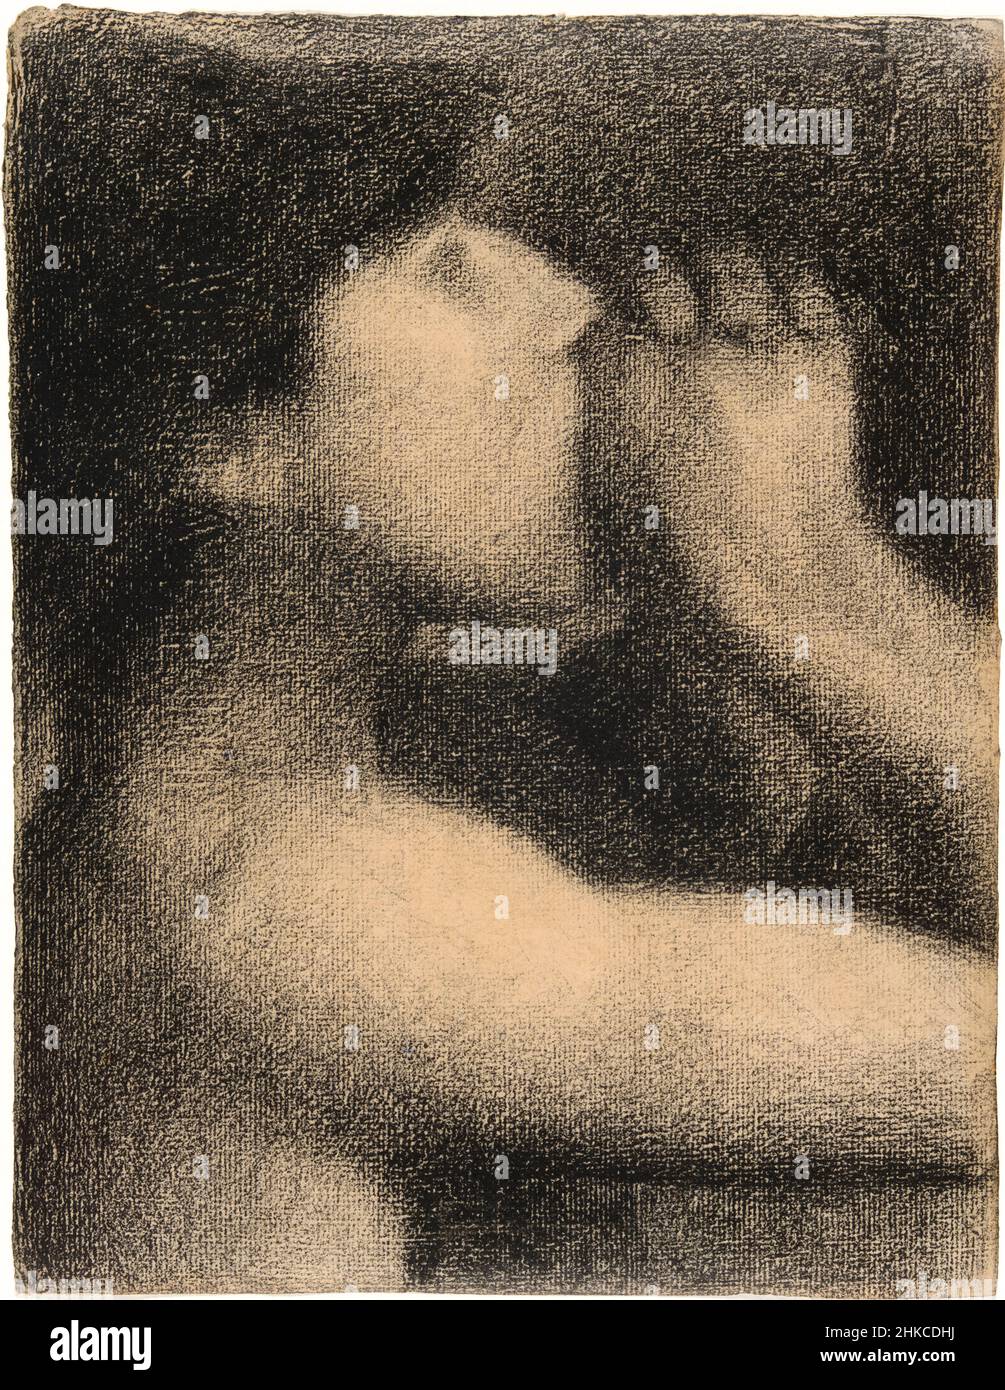 ‘Echo’ [L’echo]  conté crayon drawing by French post-Impressionist artist by Georges Seurat (1859-1891) created 1883-84. Stock Photo